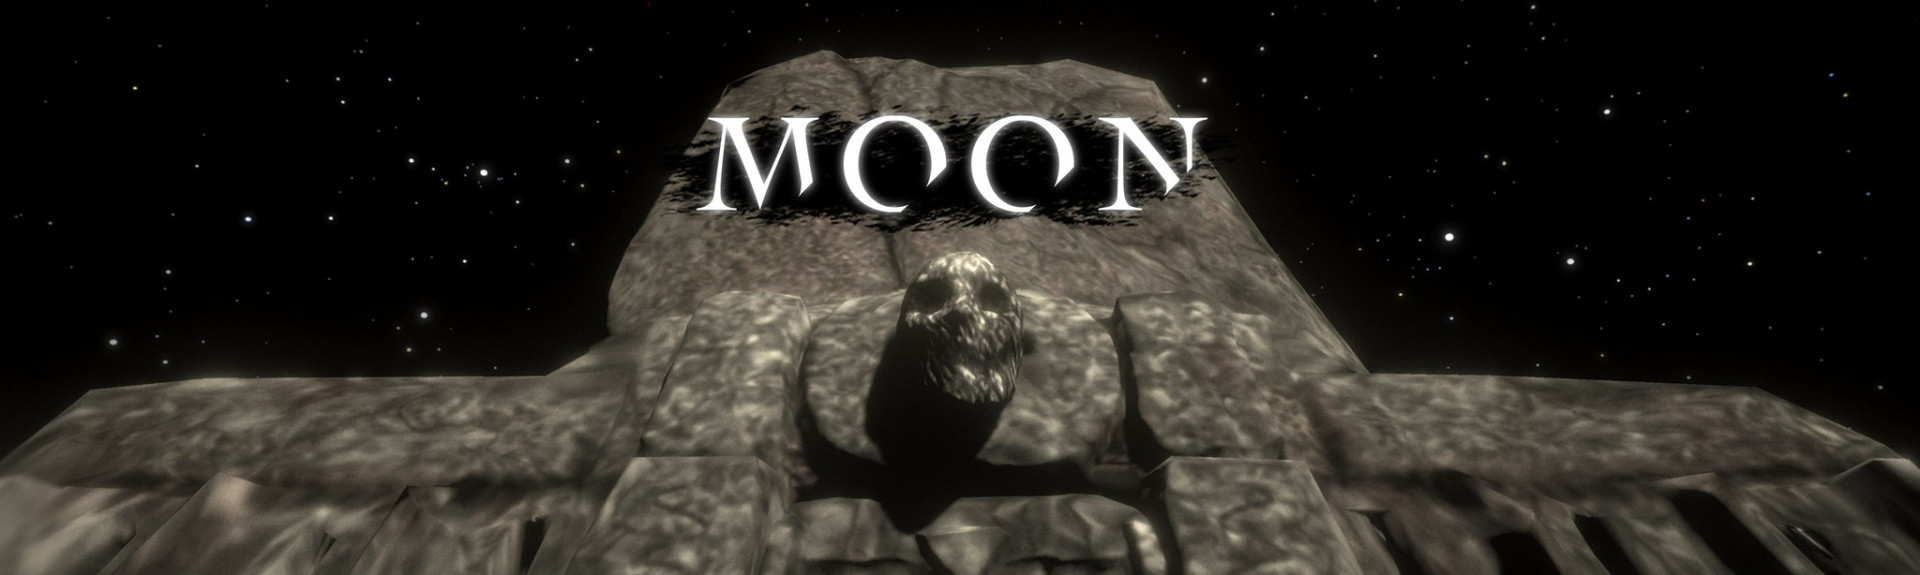 MOON - The VR Music Video